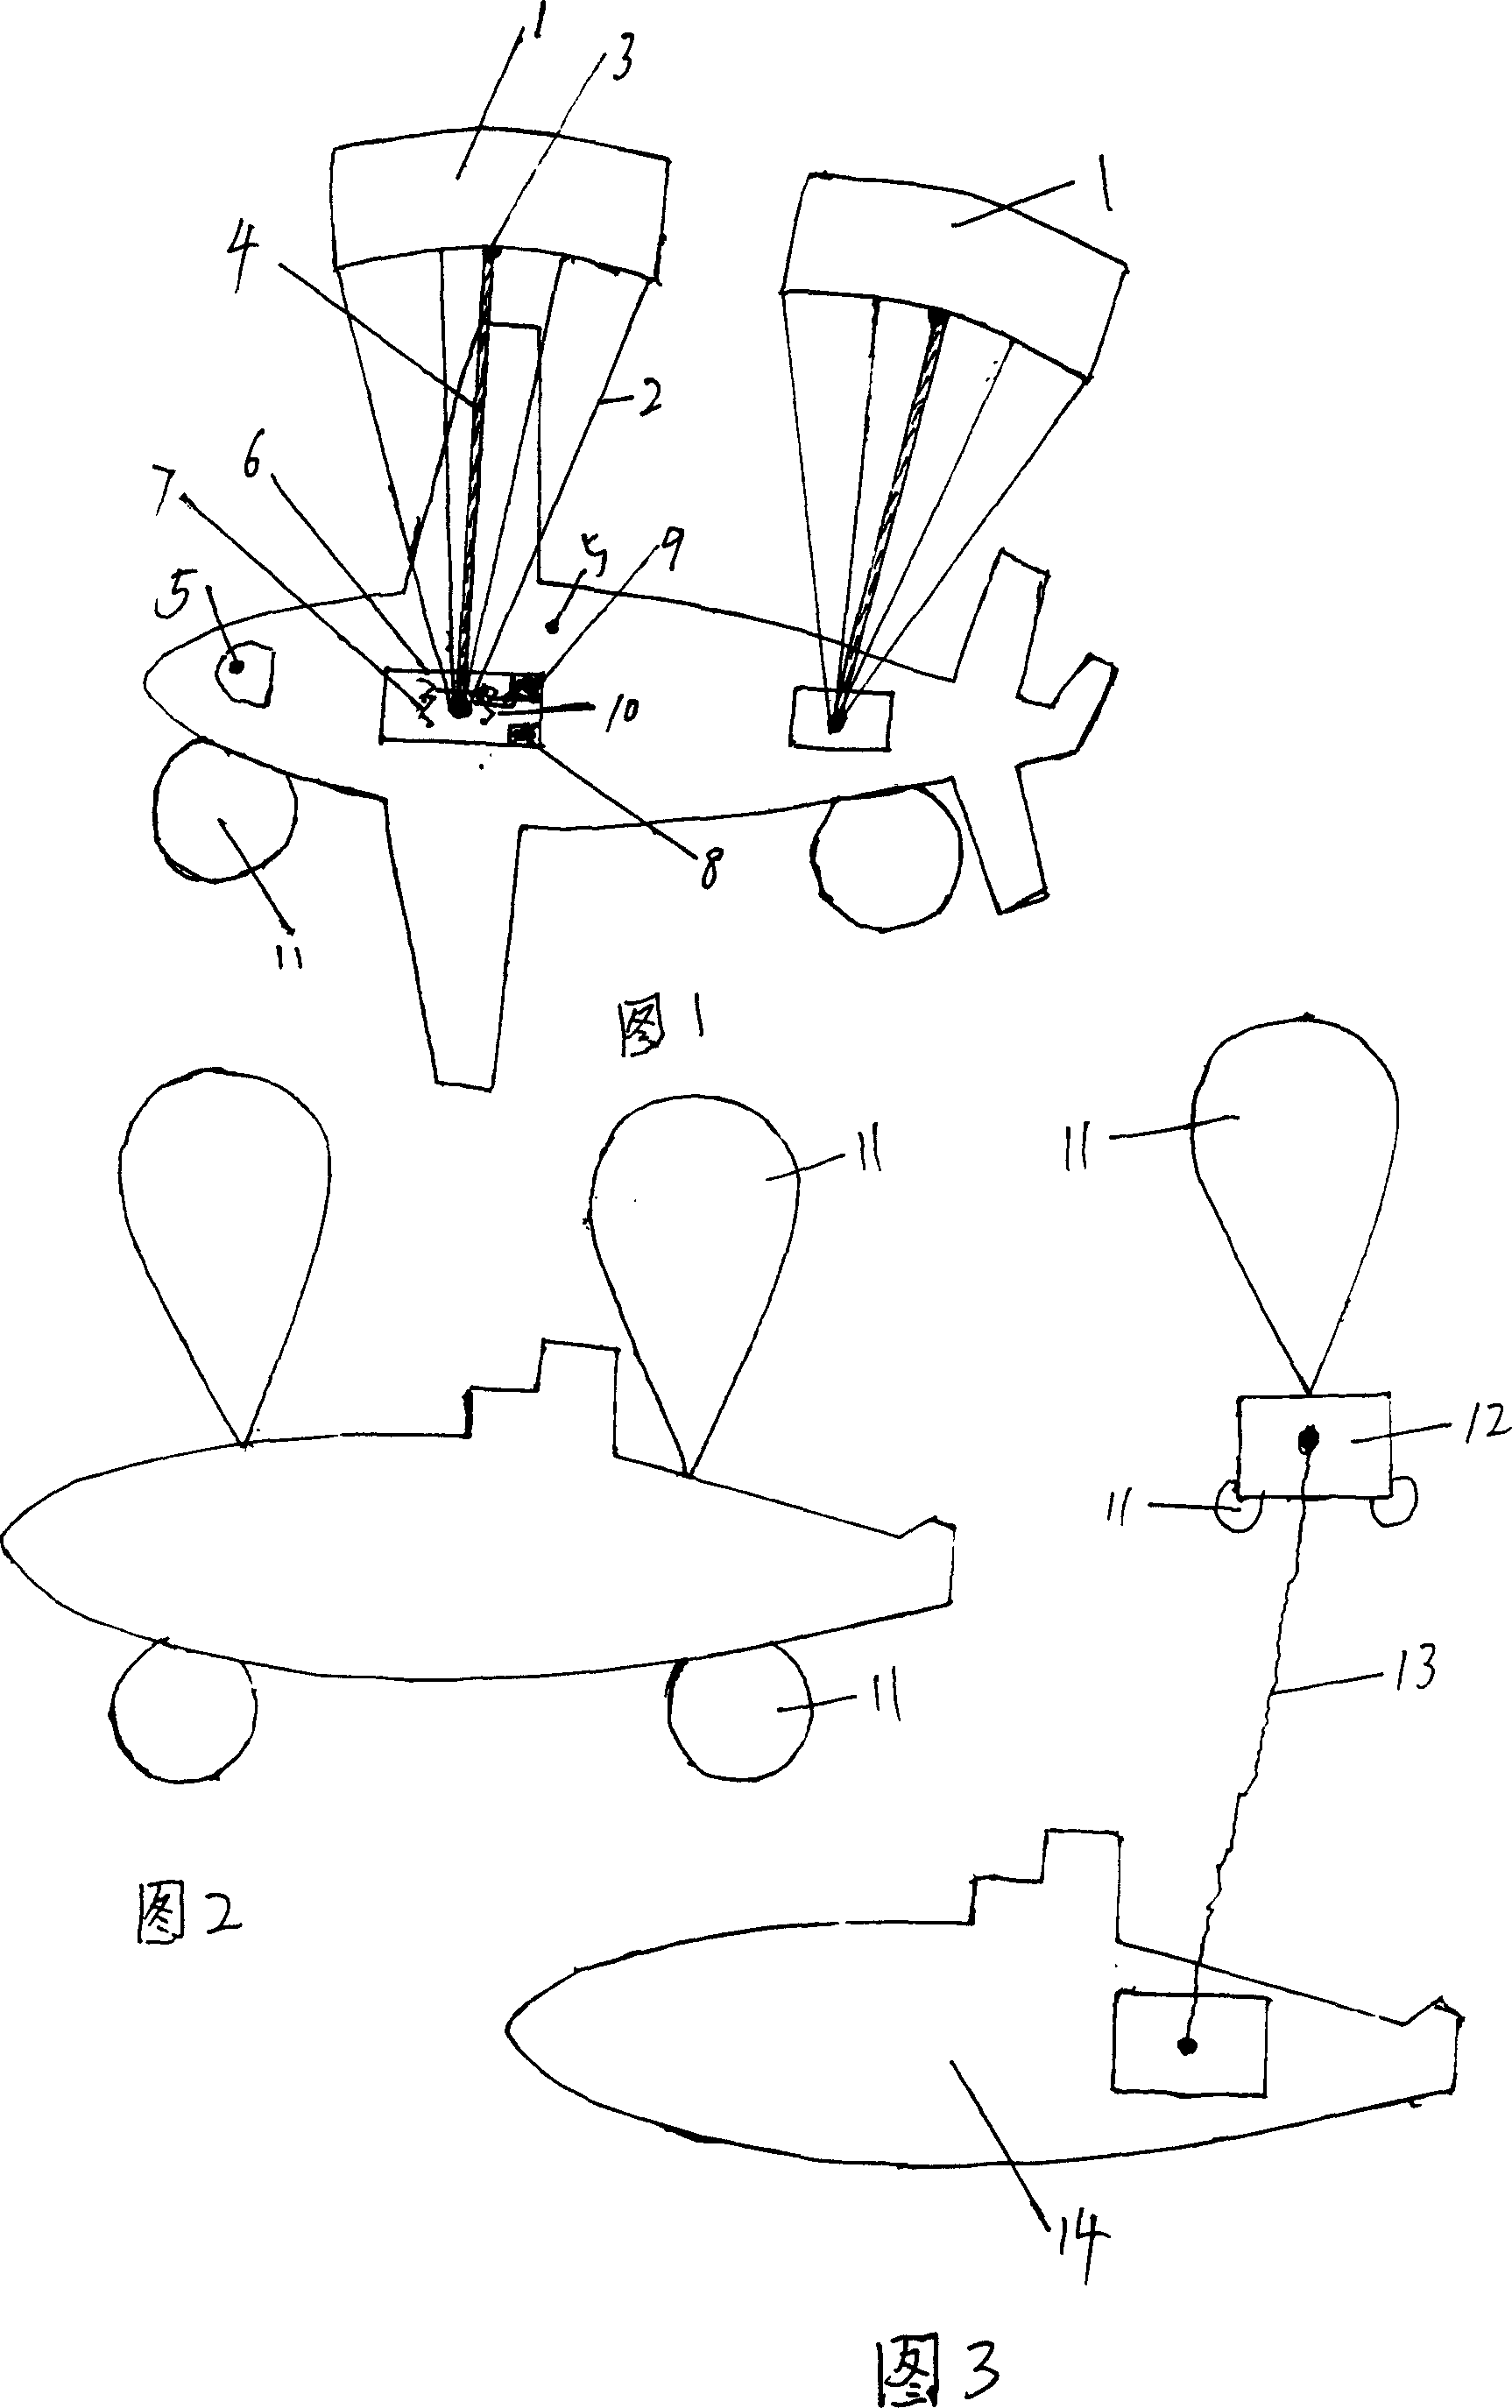 Inflated salvage apparatus for crashed plane and submarine